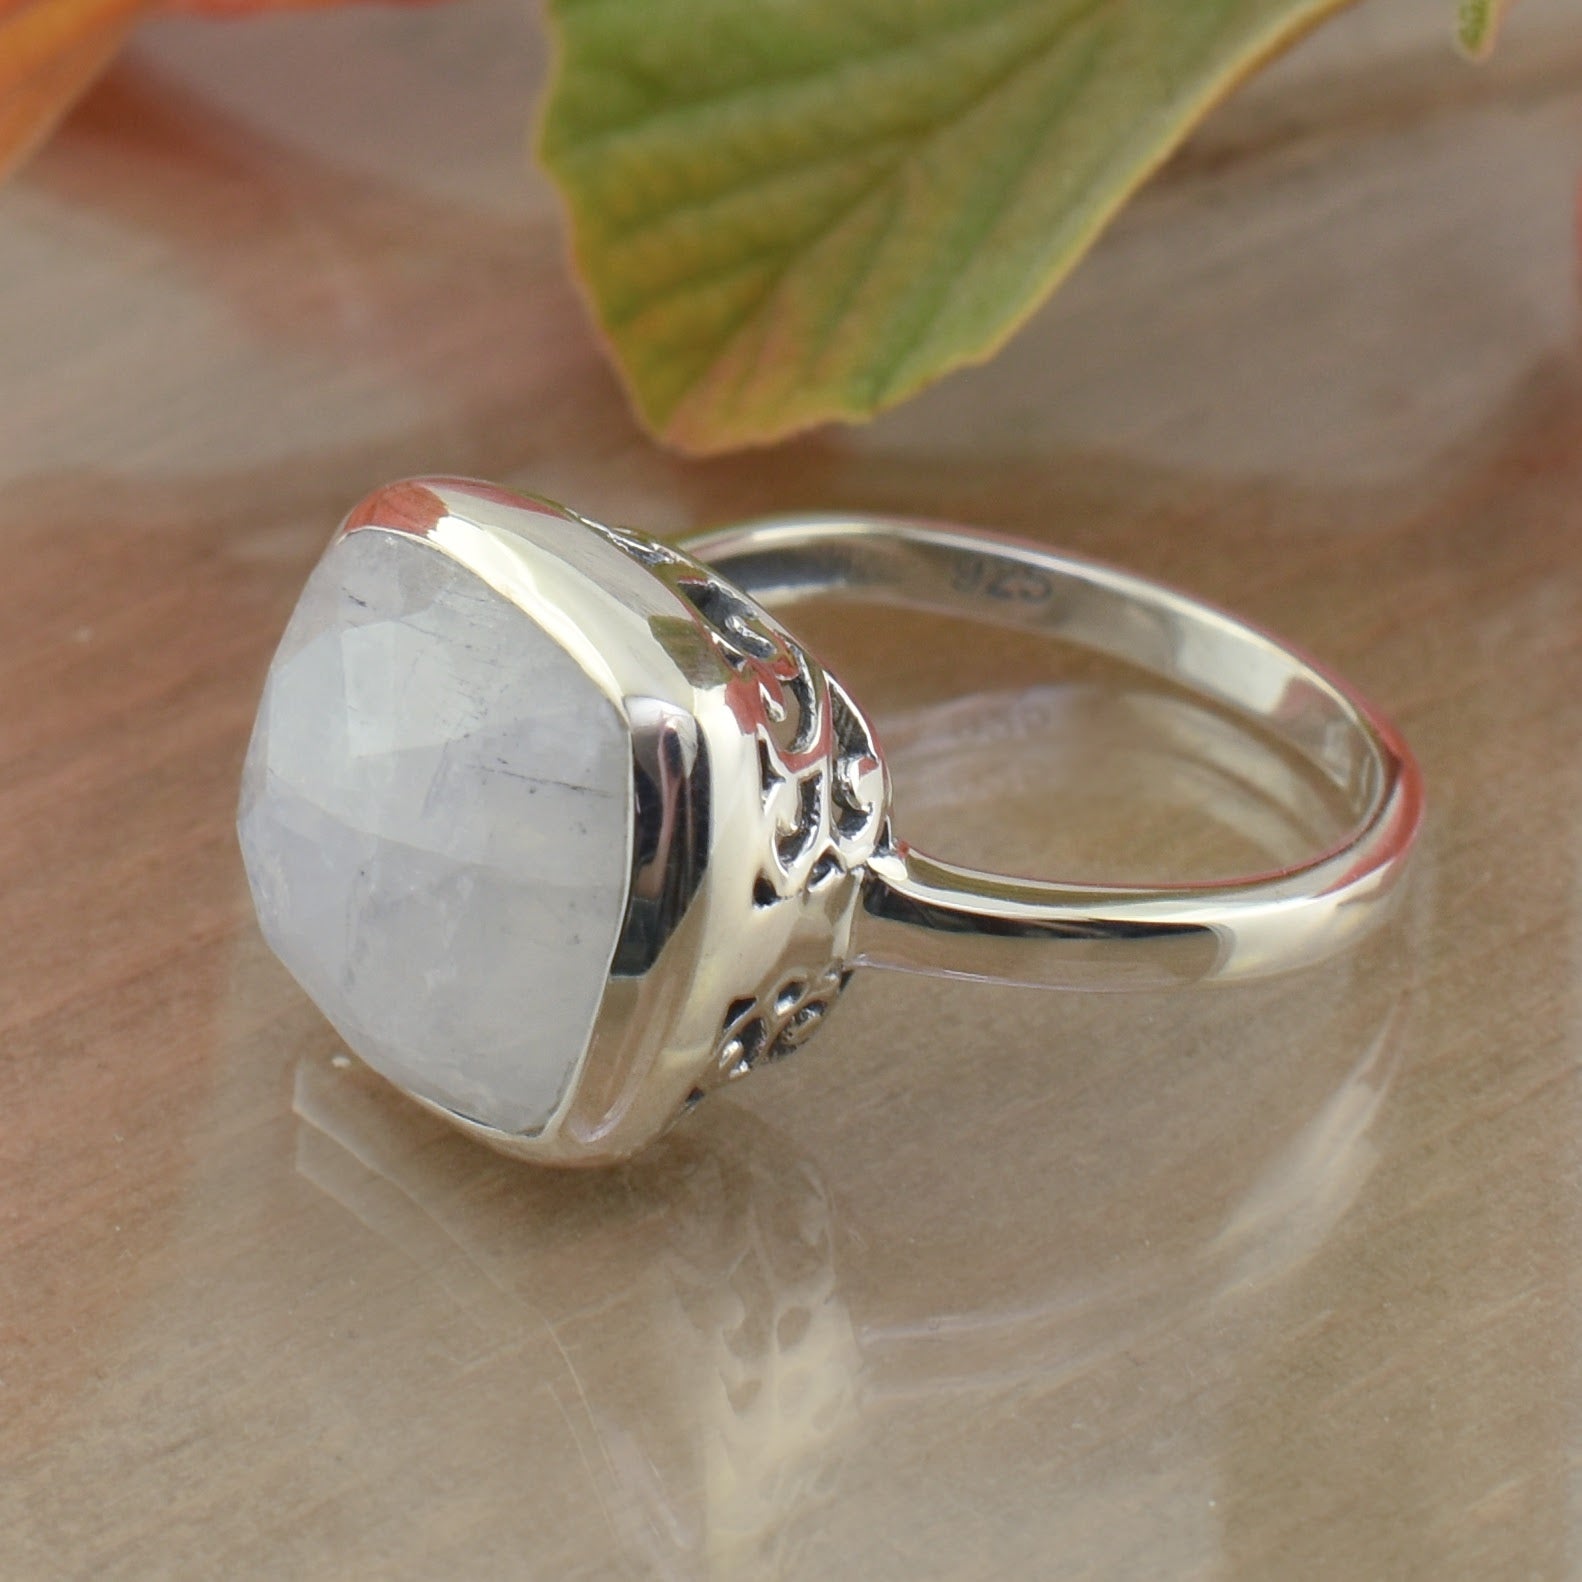 rainbow moonstone ring with thin band and bezel with cut out swirls